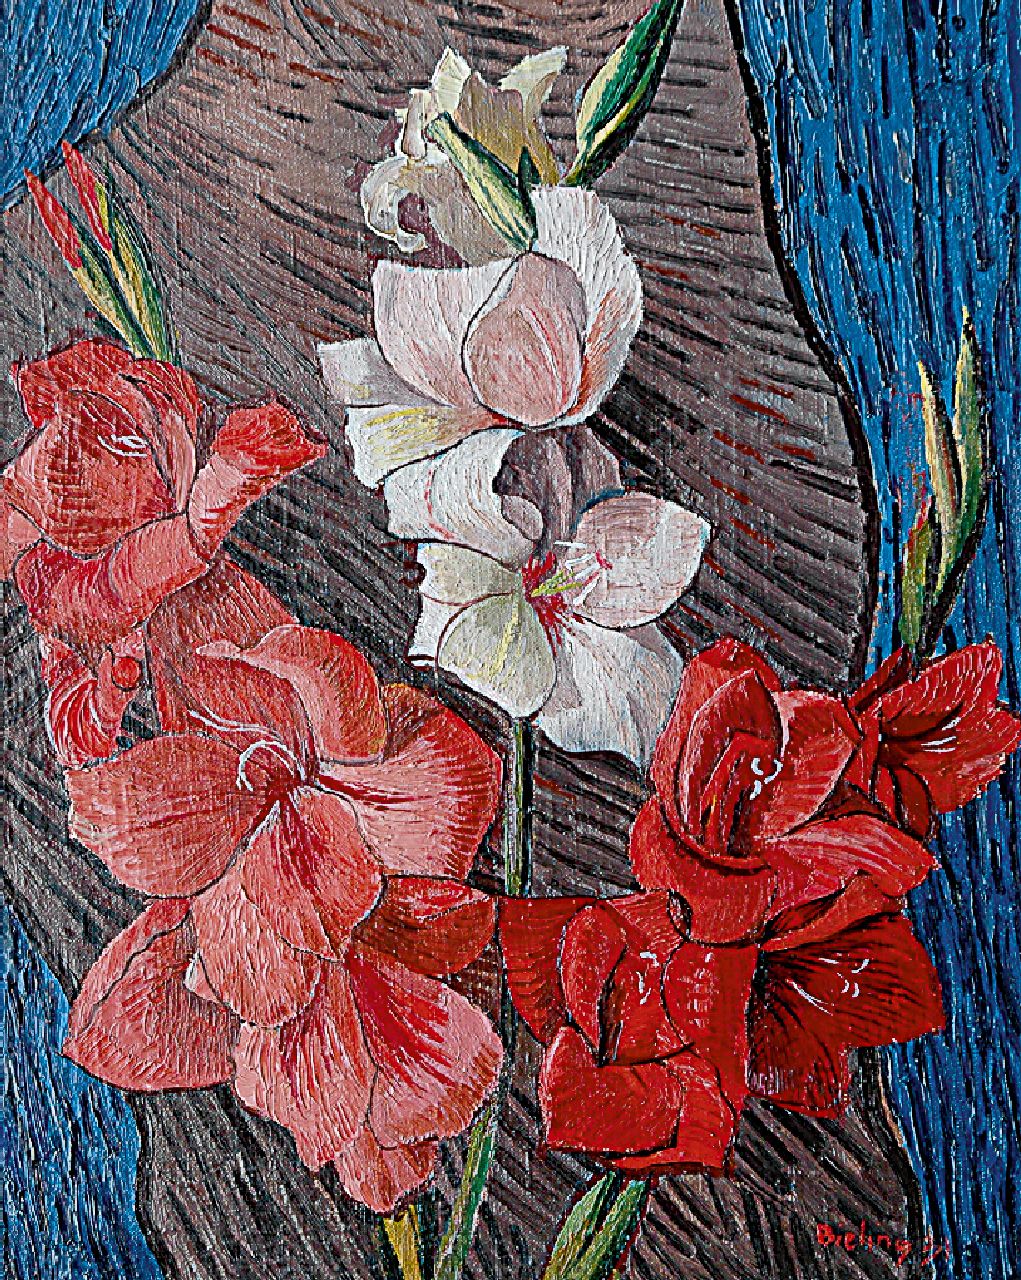 Bieling H.F.  | Hermann Friederich 'Herman' Bieling, Sword lillies, oil on canvas 38.4 x 30.6 cm, signed l.r. and dated '31